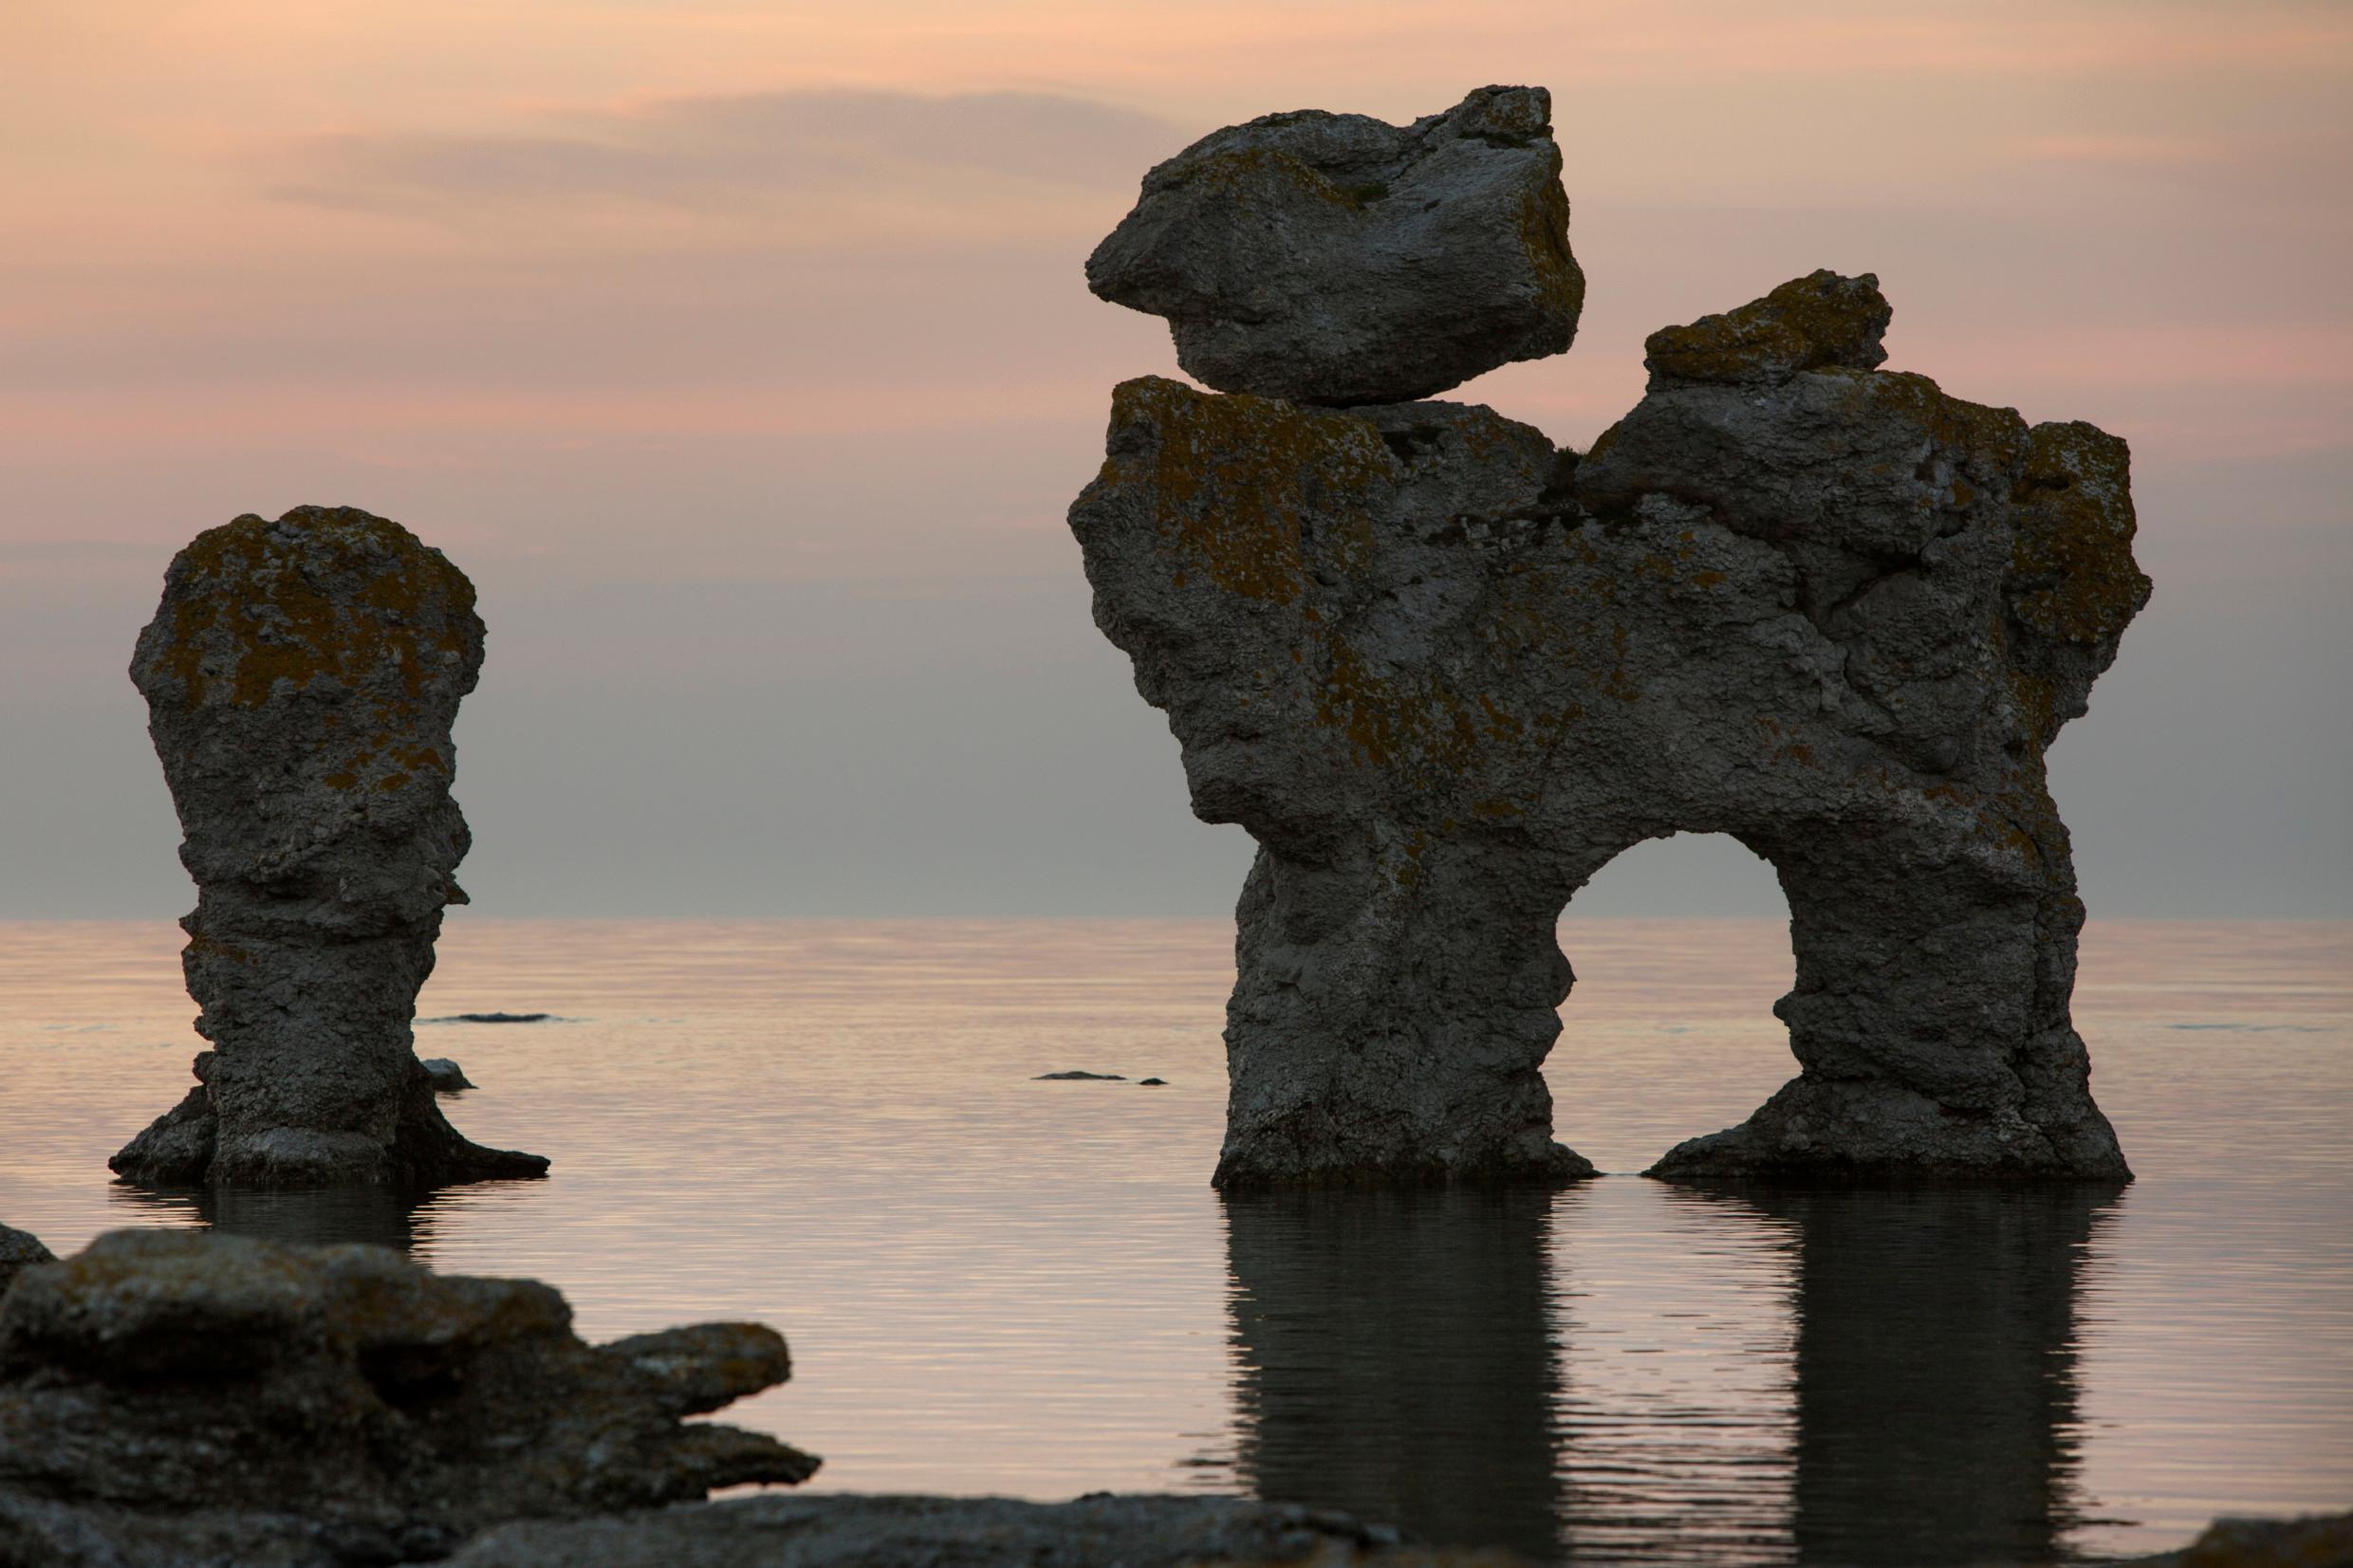 Limestone formations in the ocean at twilight.